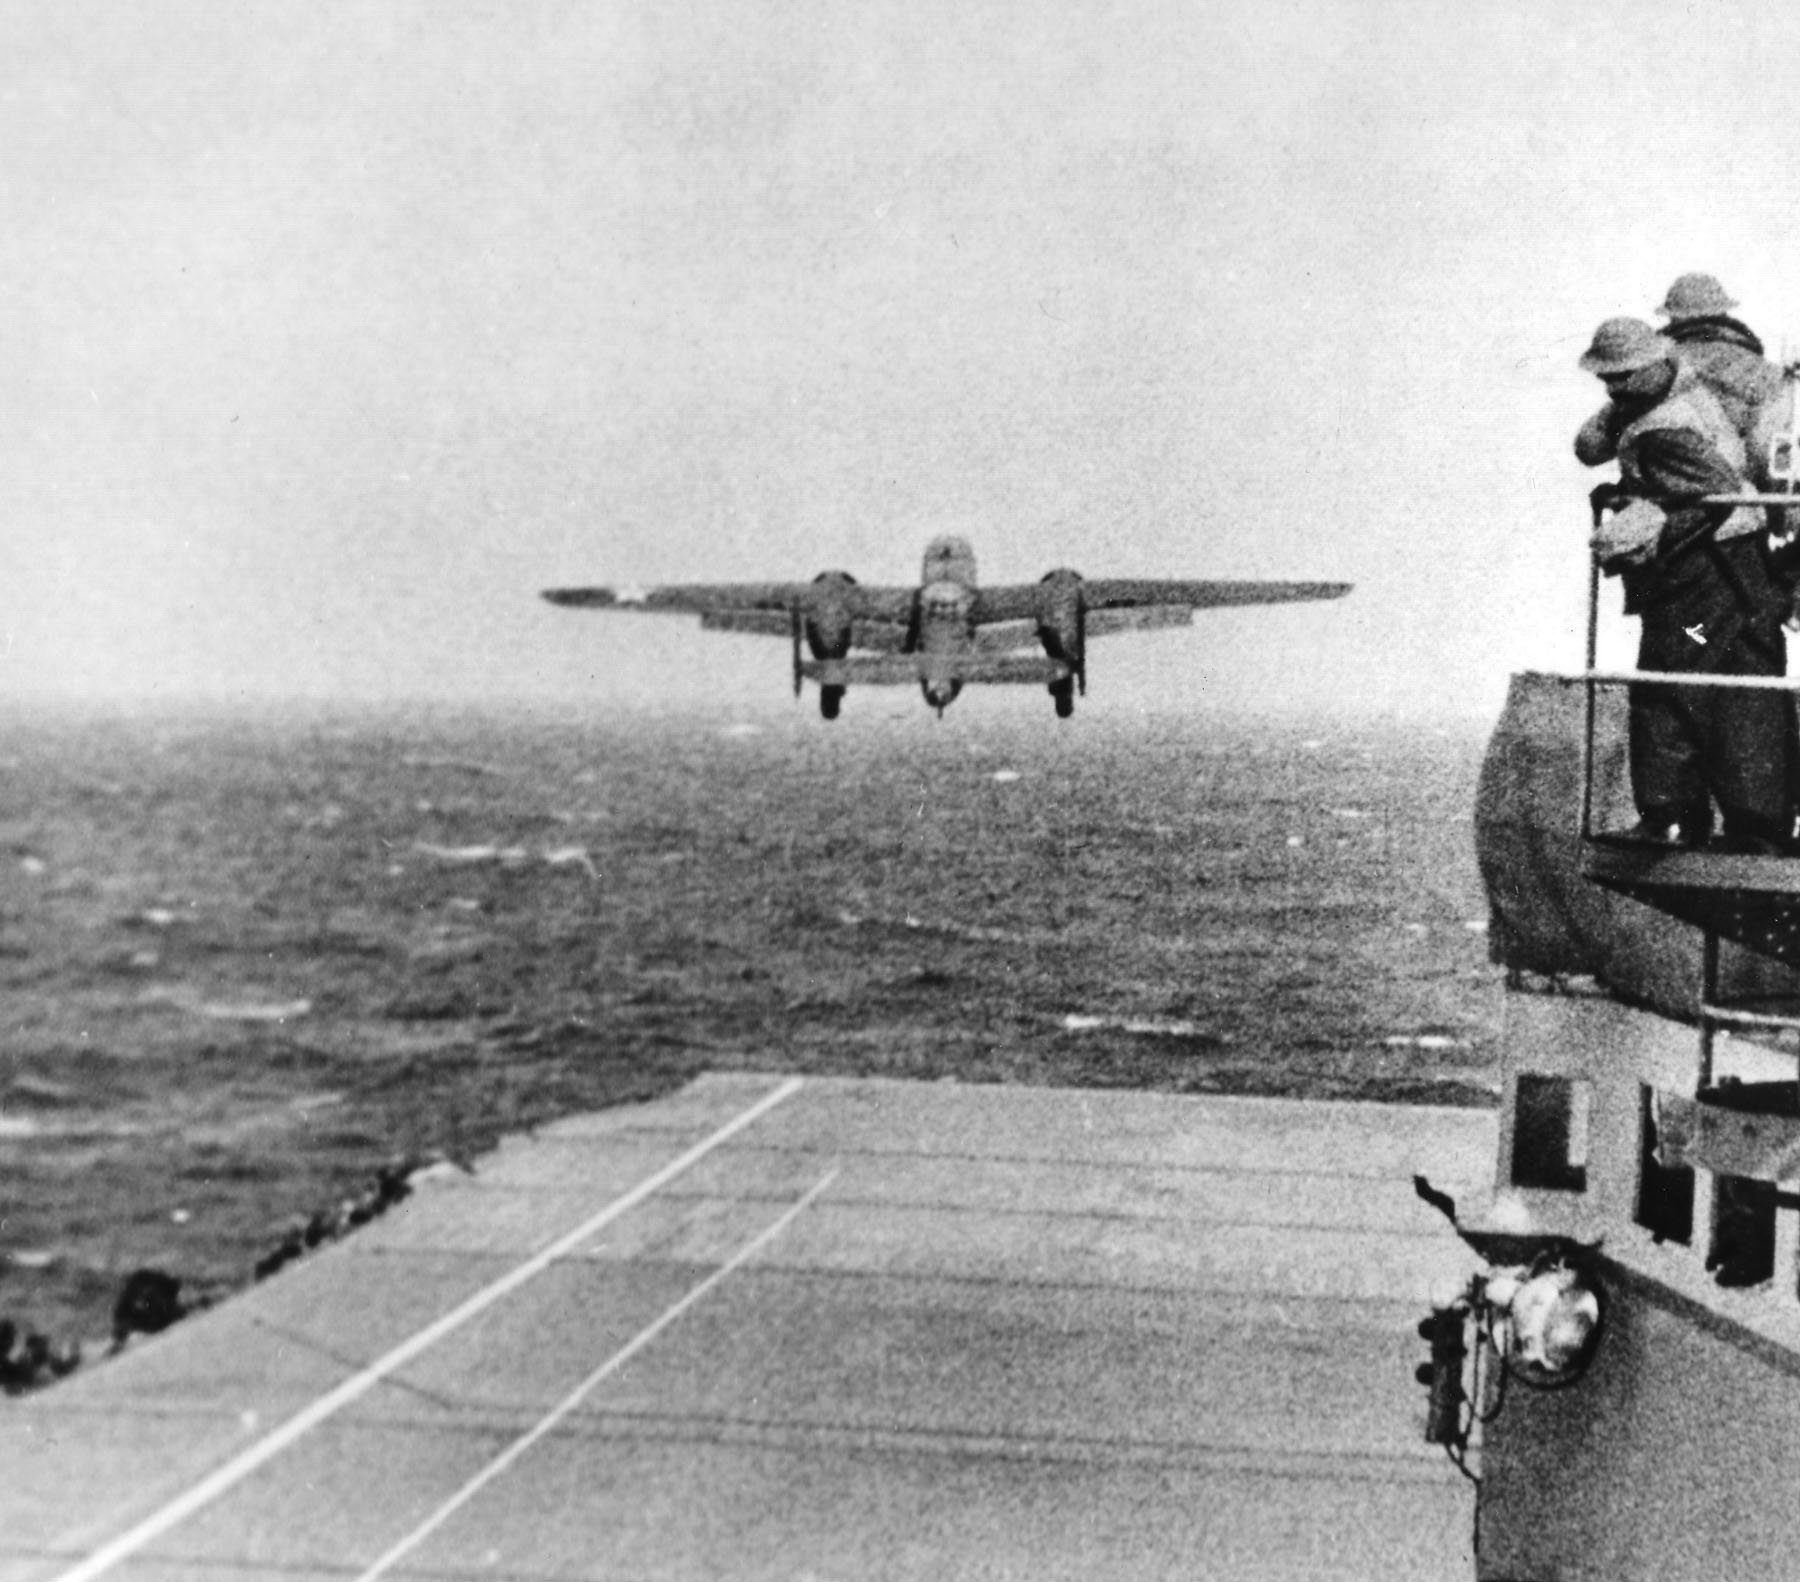 US B-25 taking off from USS Hornet for the Doolittle Raid, 18 Apr 1942